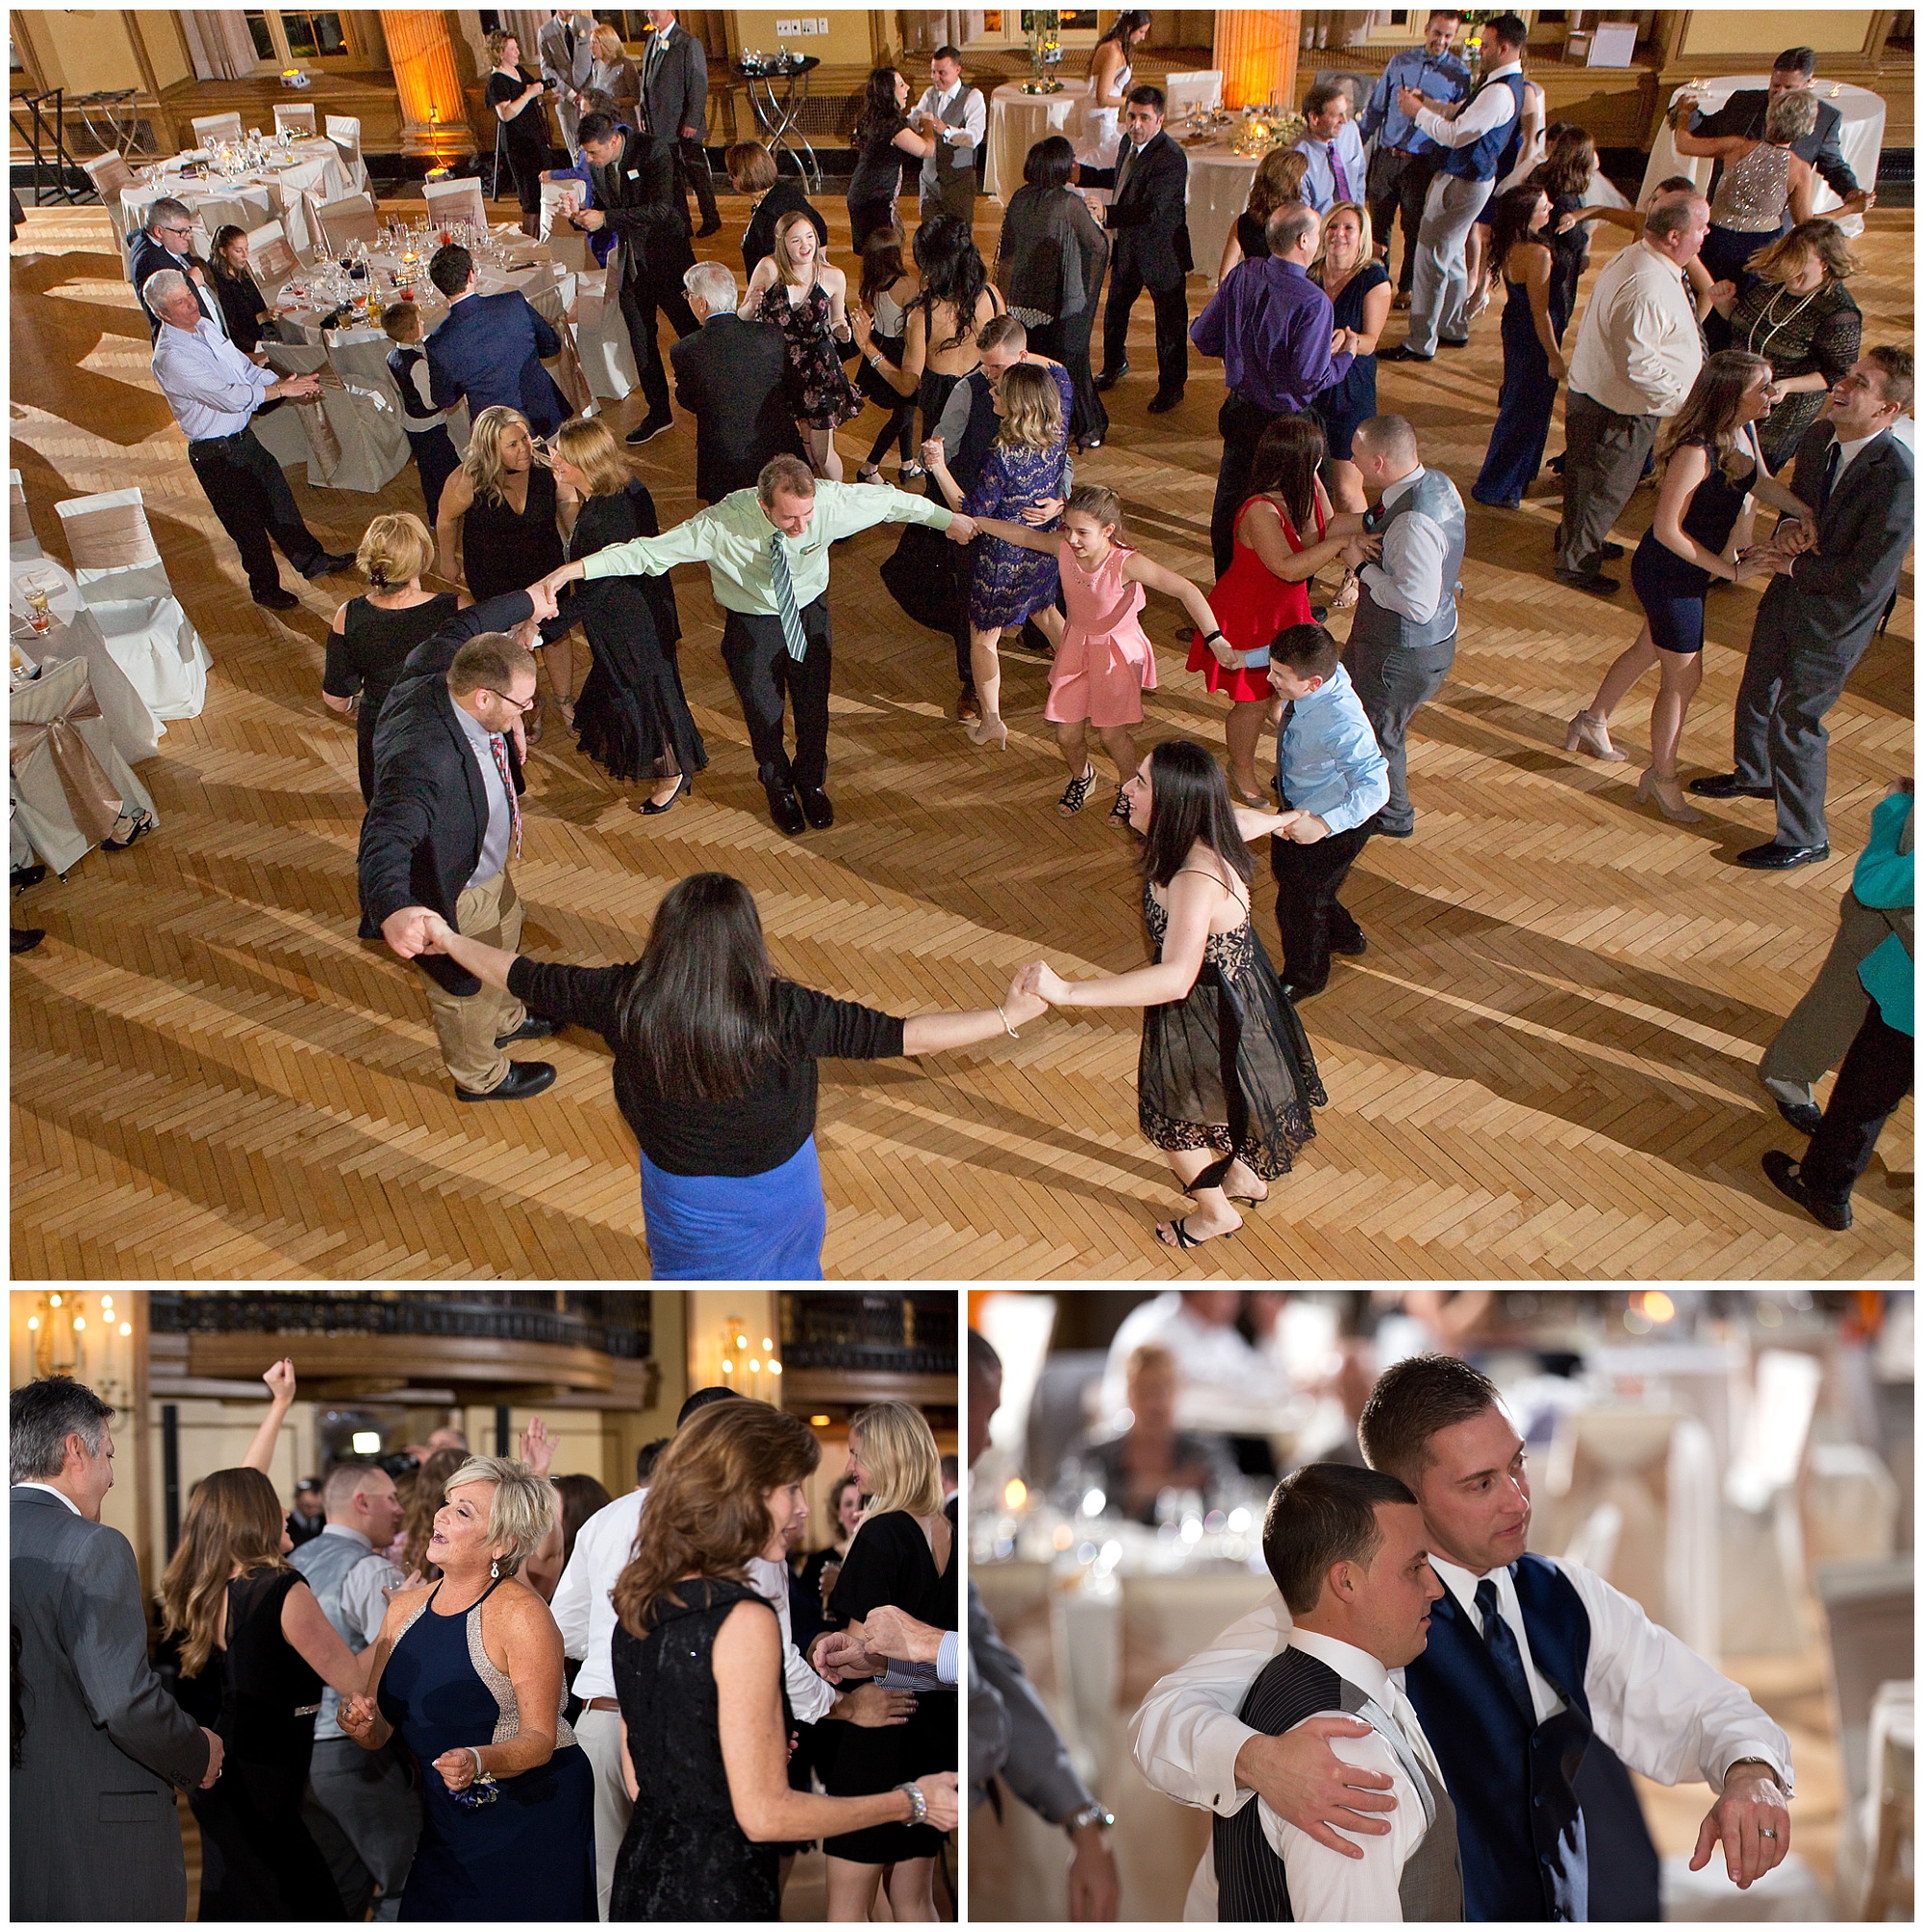 Photos of wedding guests and family dancing.